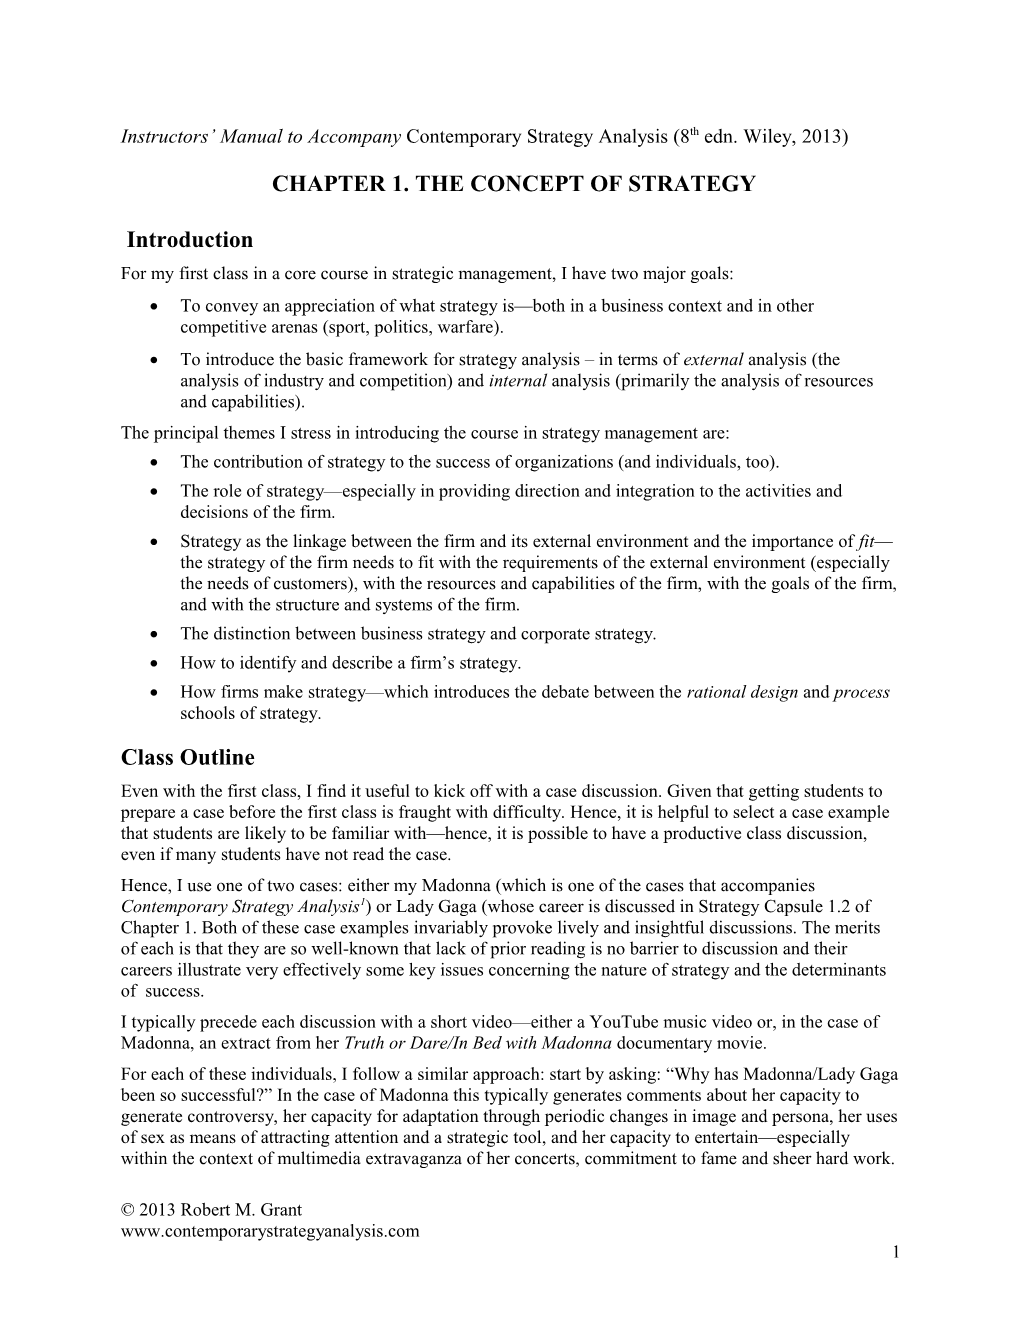 Instructors Manual to Accompanycontemporary Strategy Analysis (8Th Edn. Wiley, 2013)